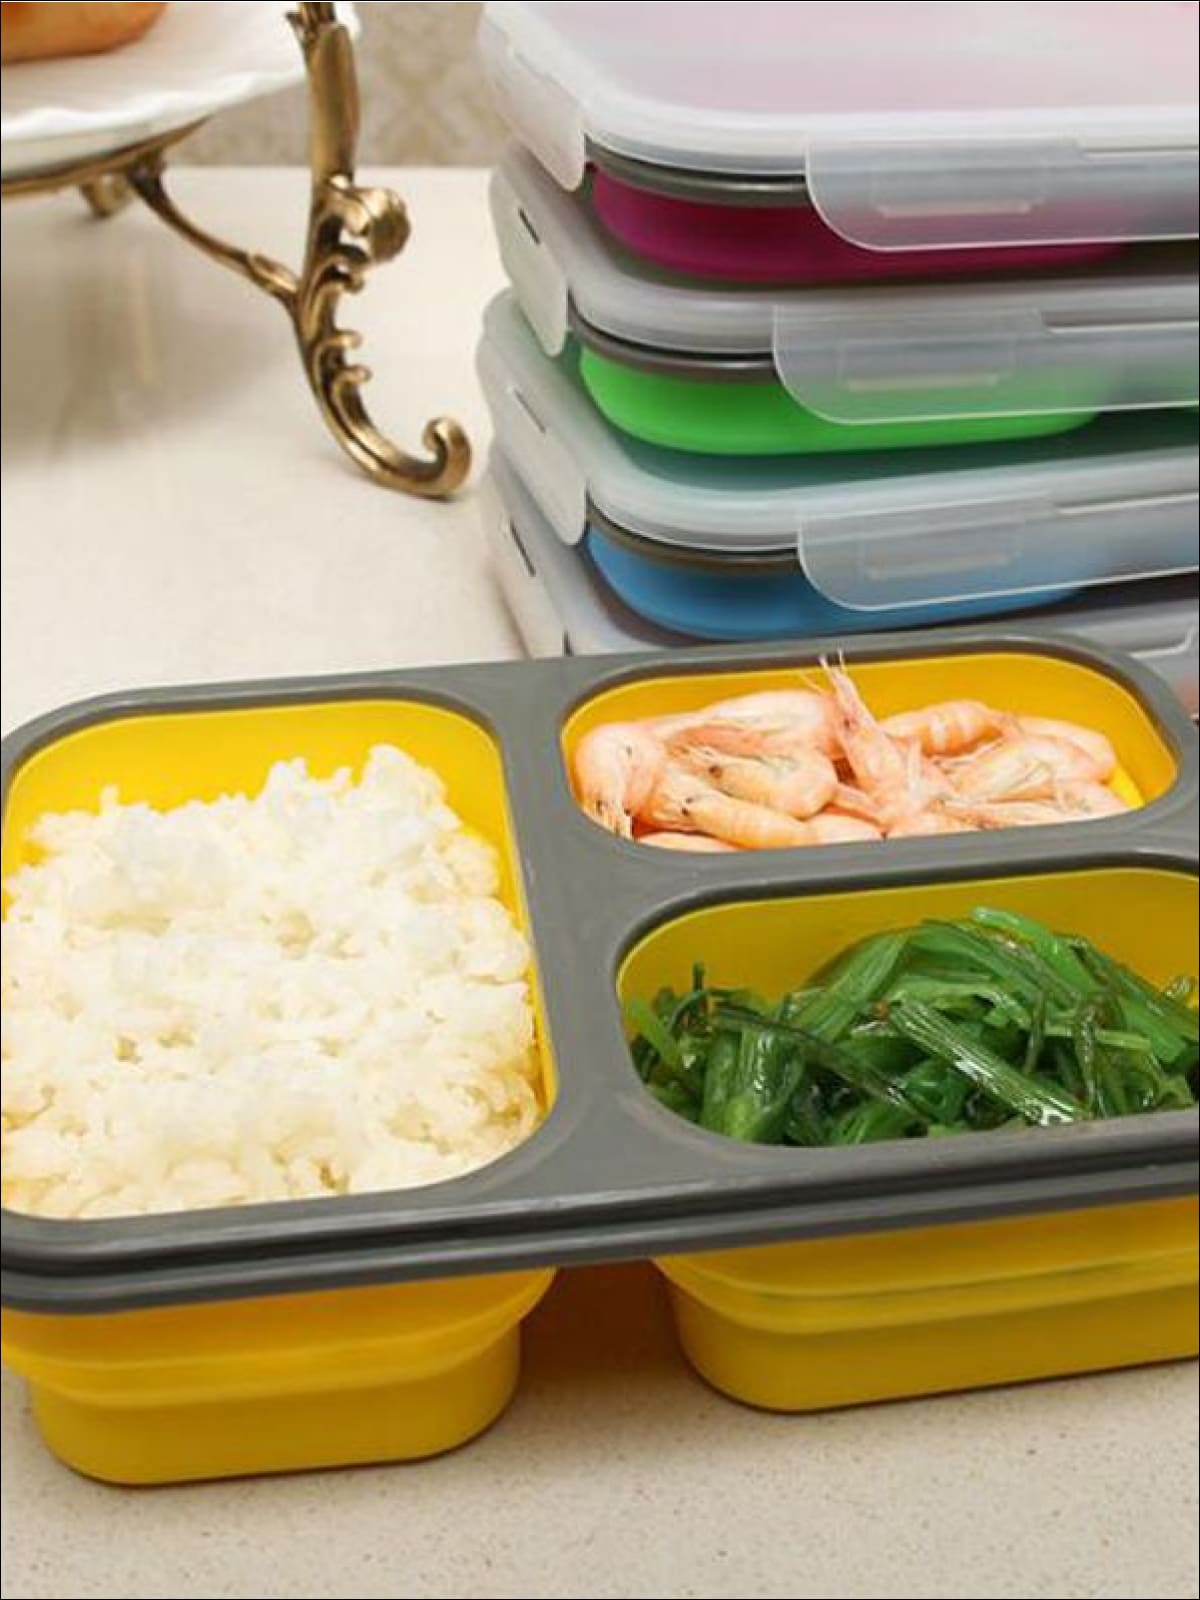 https://cdn.shopify.com/s/files/1/0996/1812/products/large-lunch-bento-box-container-3-colors-20-39-99-40-59-afterchristmas-back-to-school-bfcutoff-mia-belle-overseas-fulfillment-baby_258.jpg